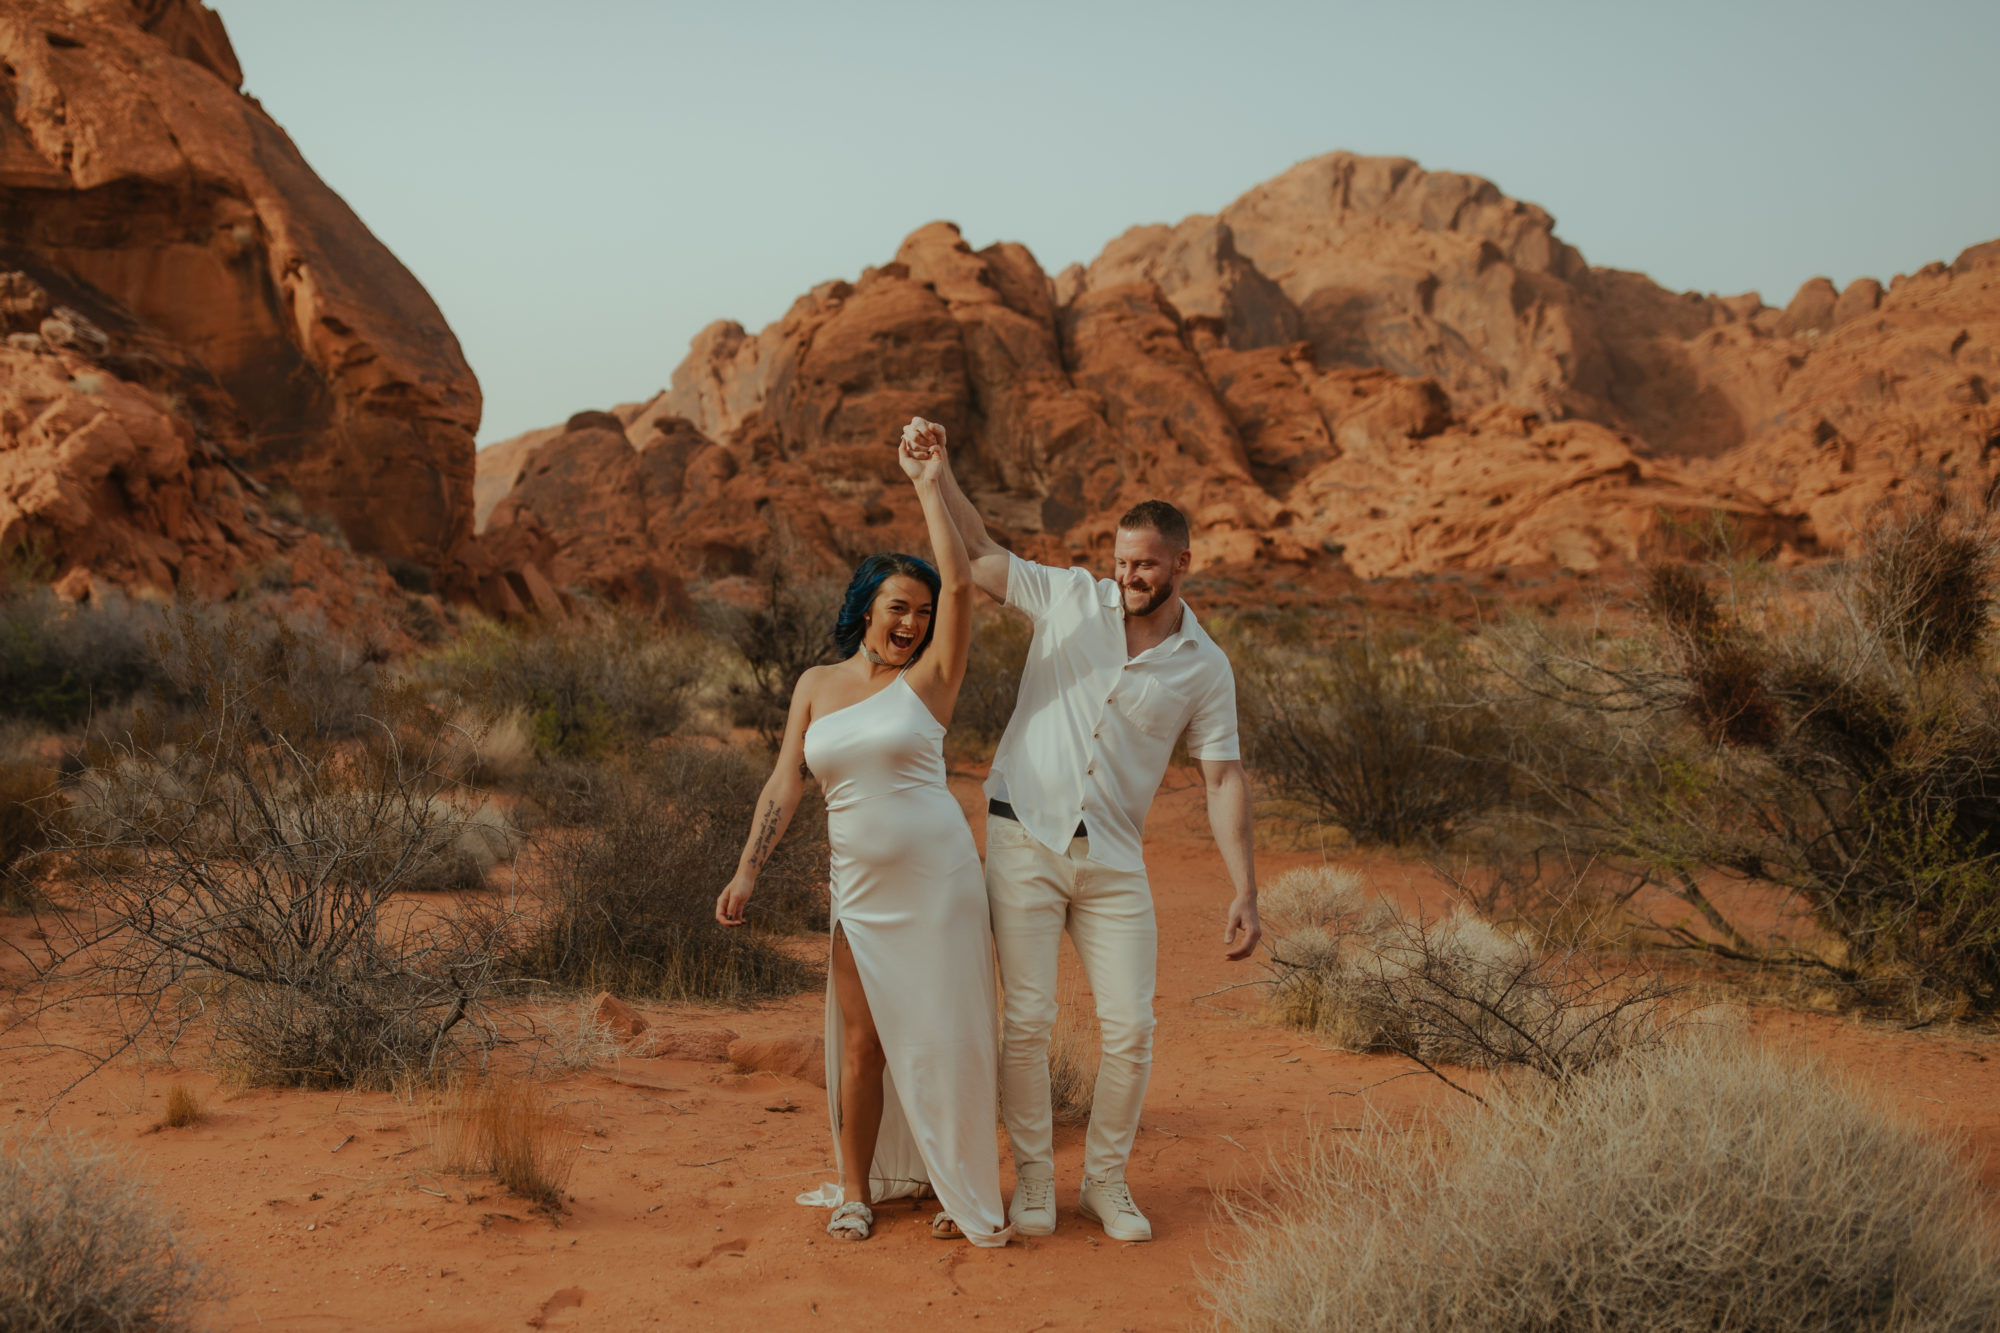 engaged couple walking and bumping their hips together as they walk through the desert during a dust storm